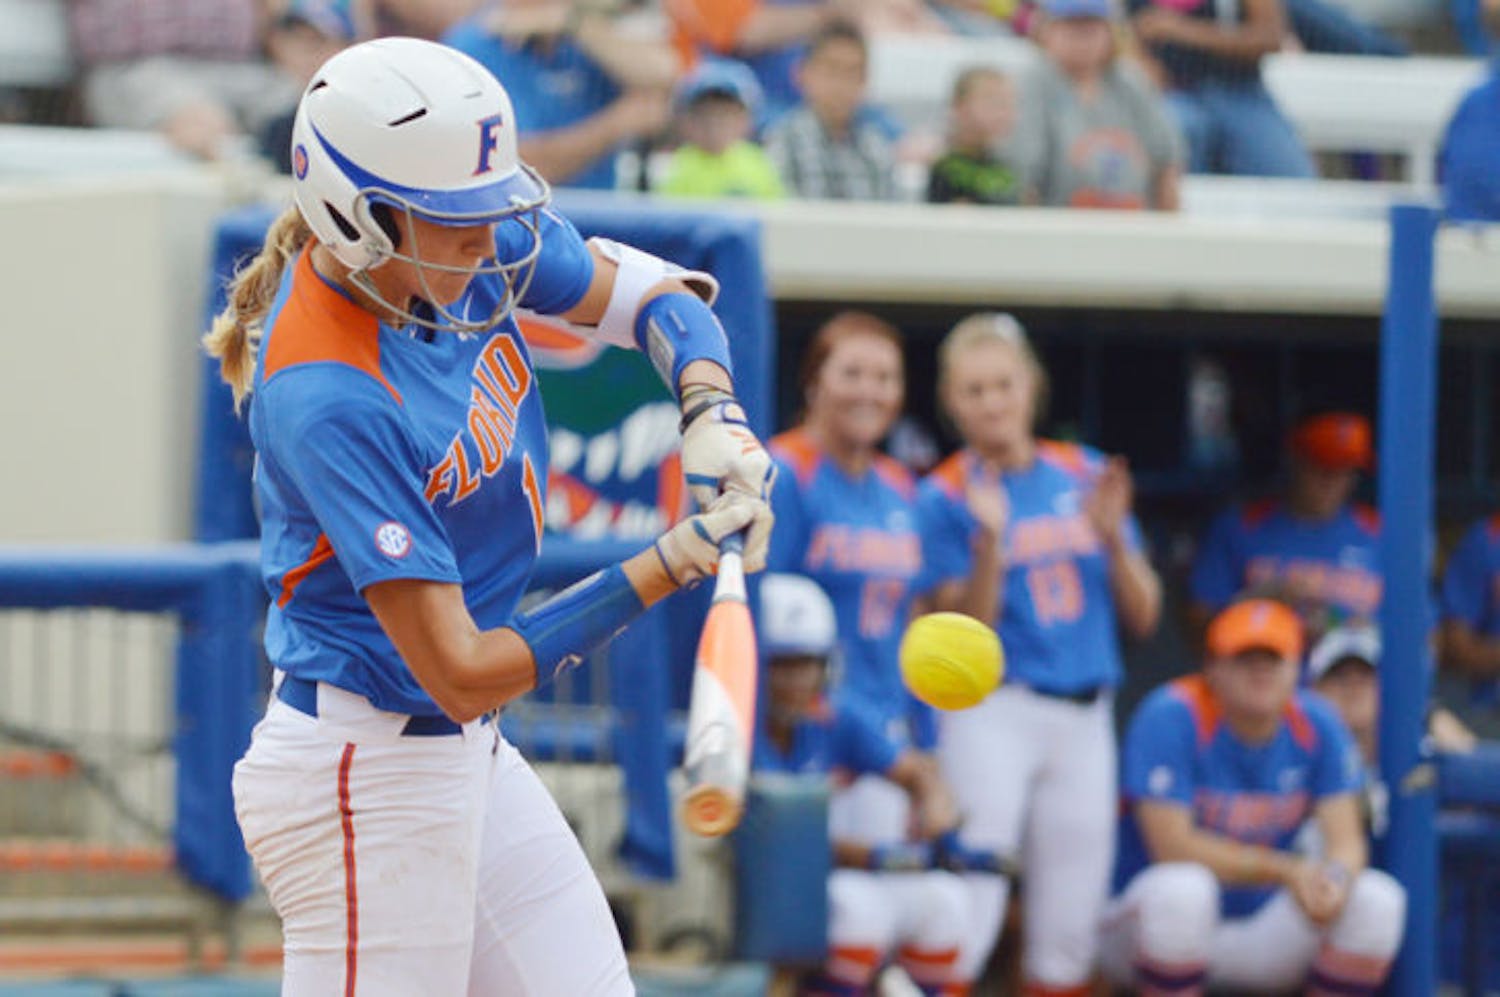 Aubree Munro swings during Florida’s 7-6 win against Auburn on Saturday at Katie Seashole Pressly Stadium. Munro hit two doubles in Florida’s first game against Auburn on Friday.